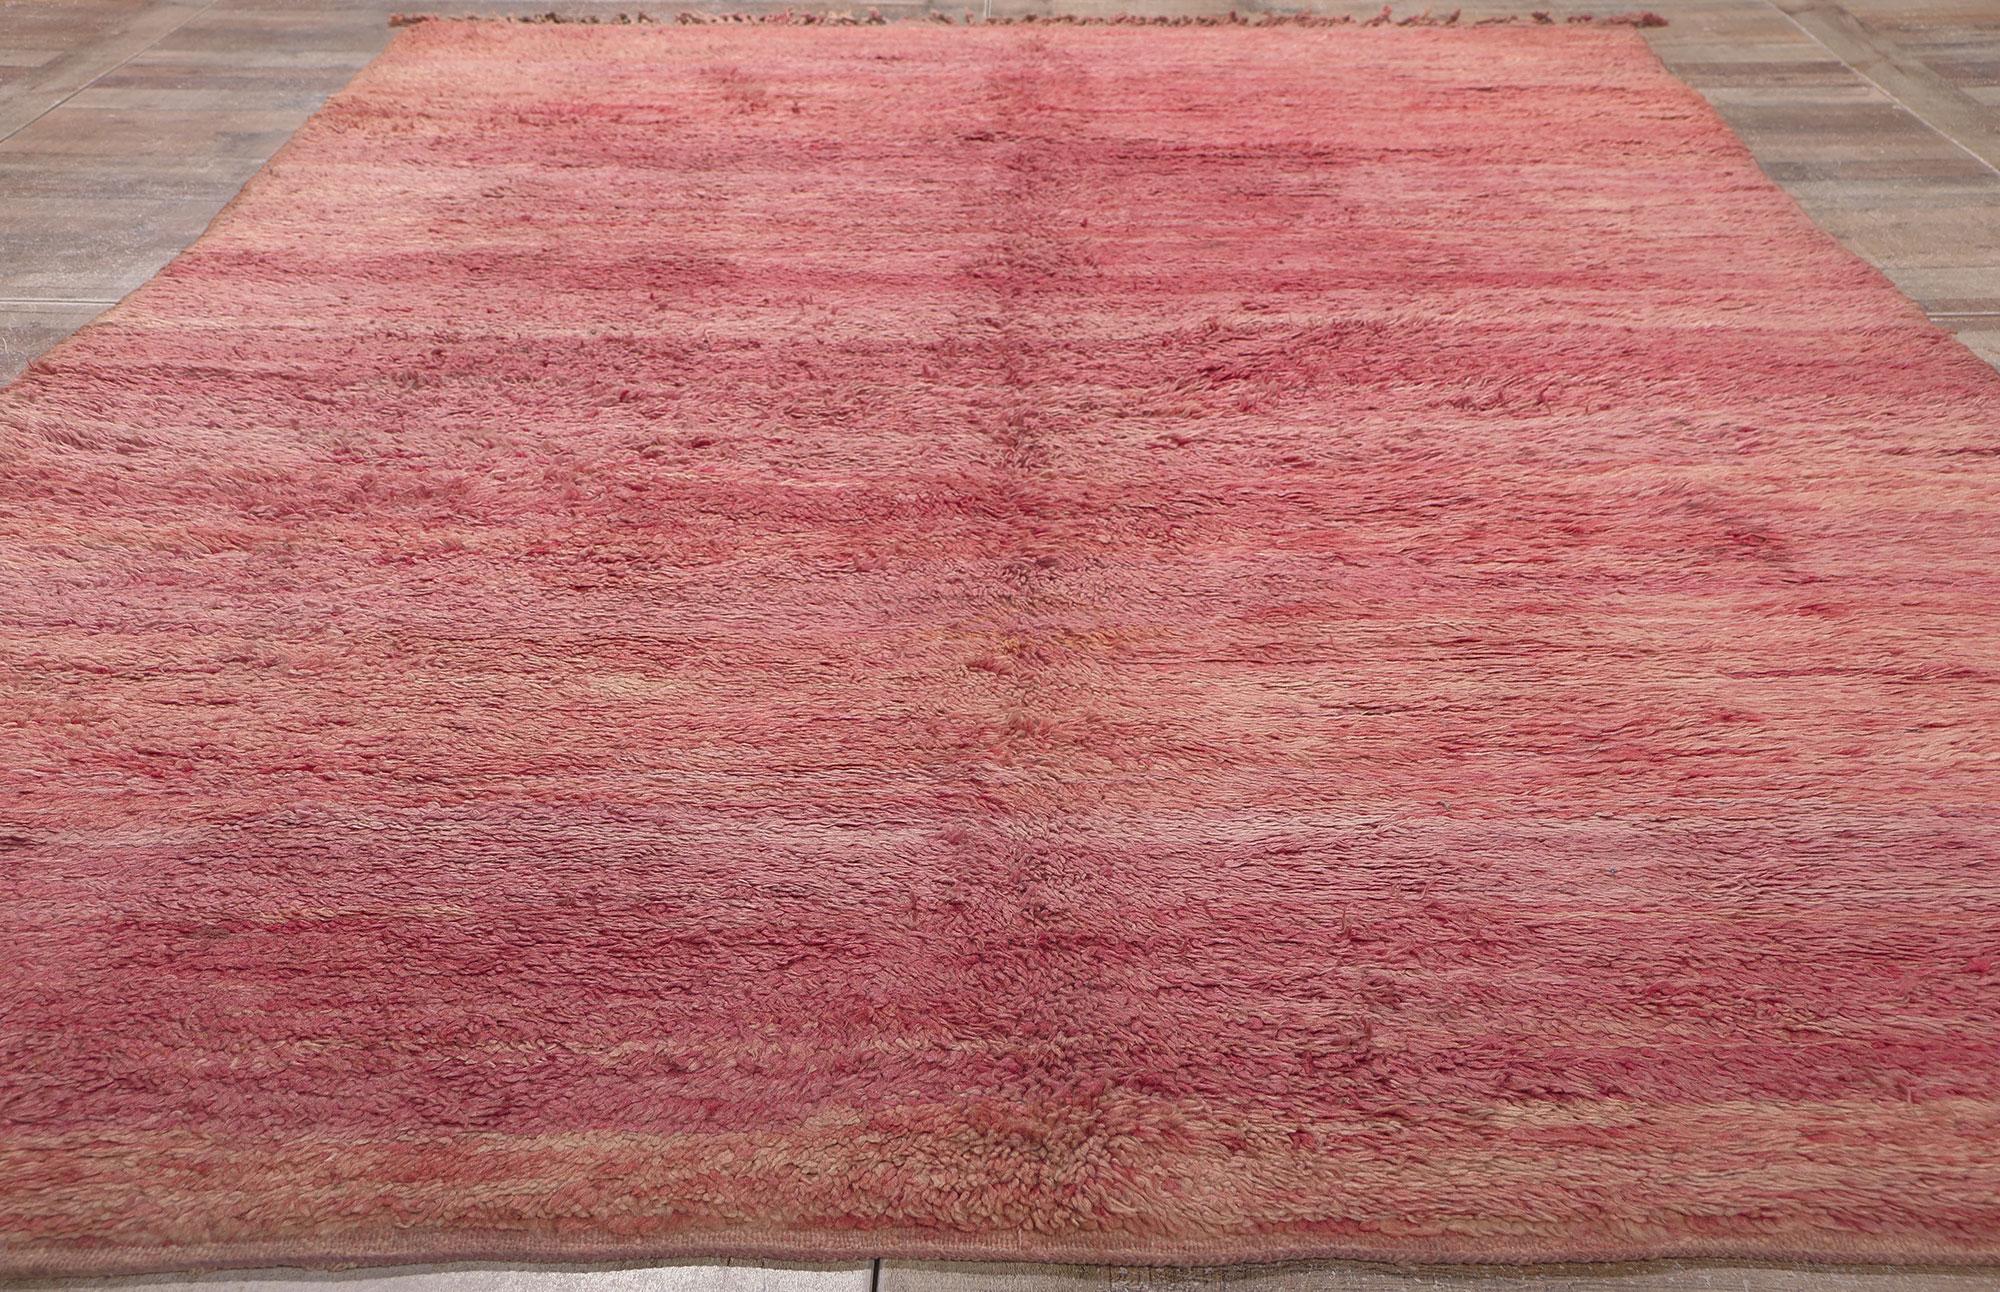 Vintage Pink Beni Mrirt Moroccan Rug, Nomadic Charm Meets Abstract Expressionism For Sale 1